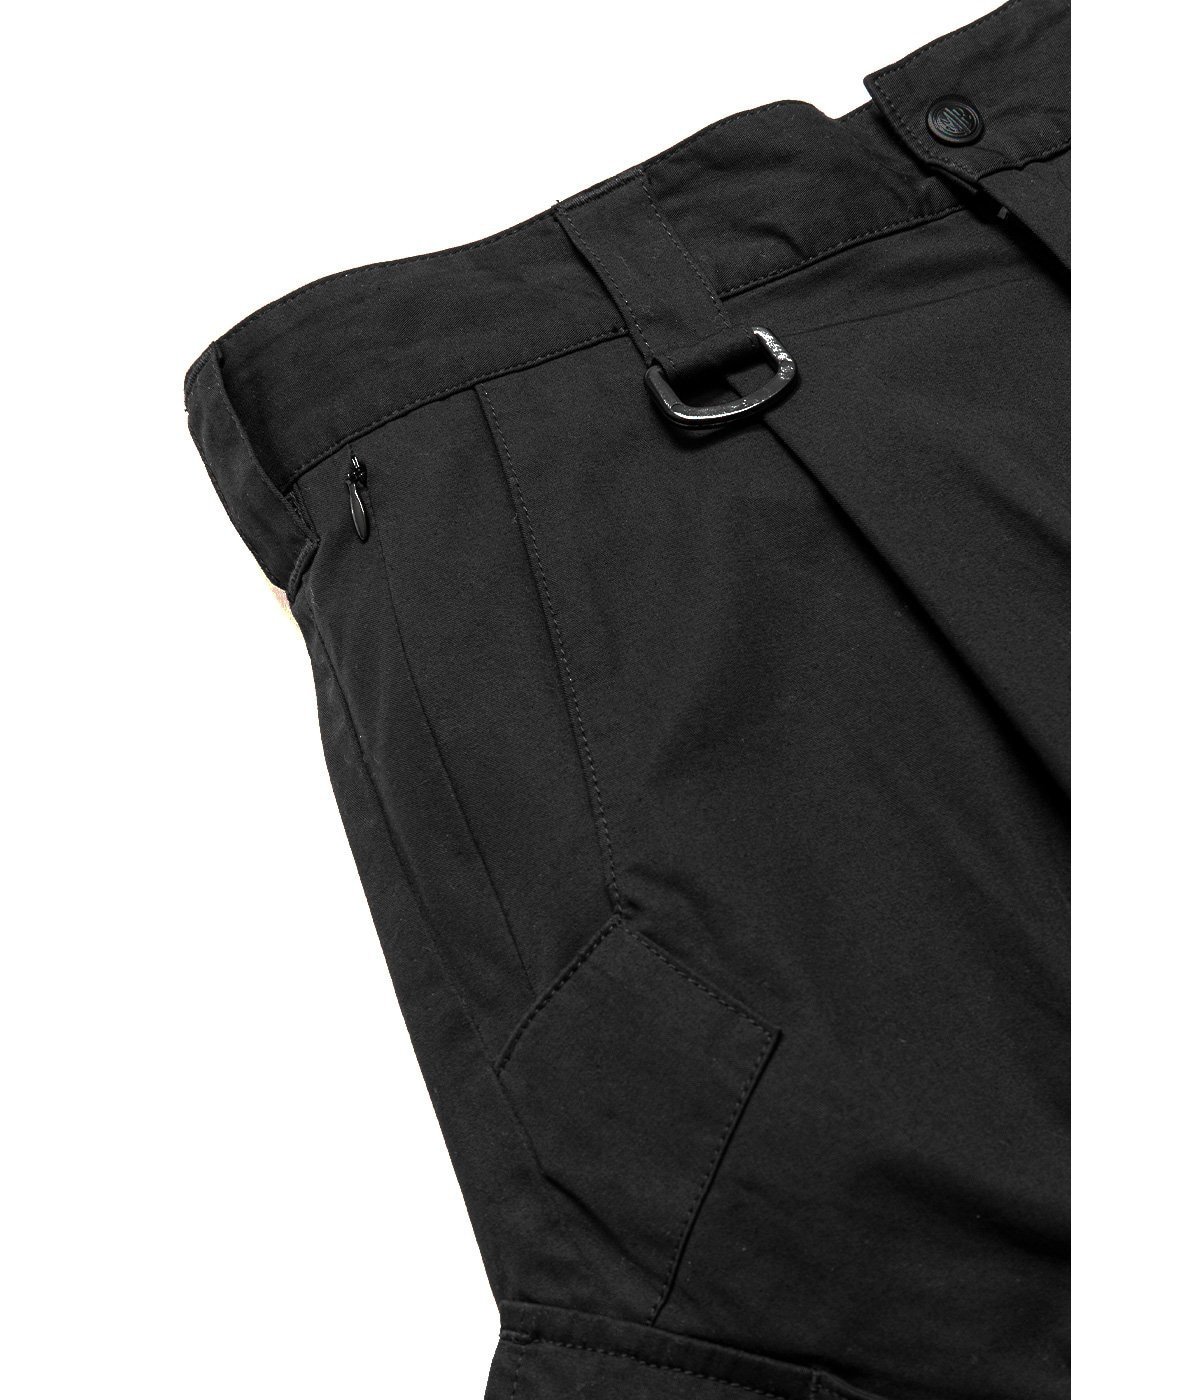 MDU Pant | MOUT RECON TAILOR(マウトリーコンテーラー) / パンツ 